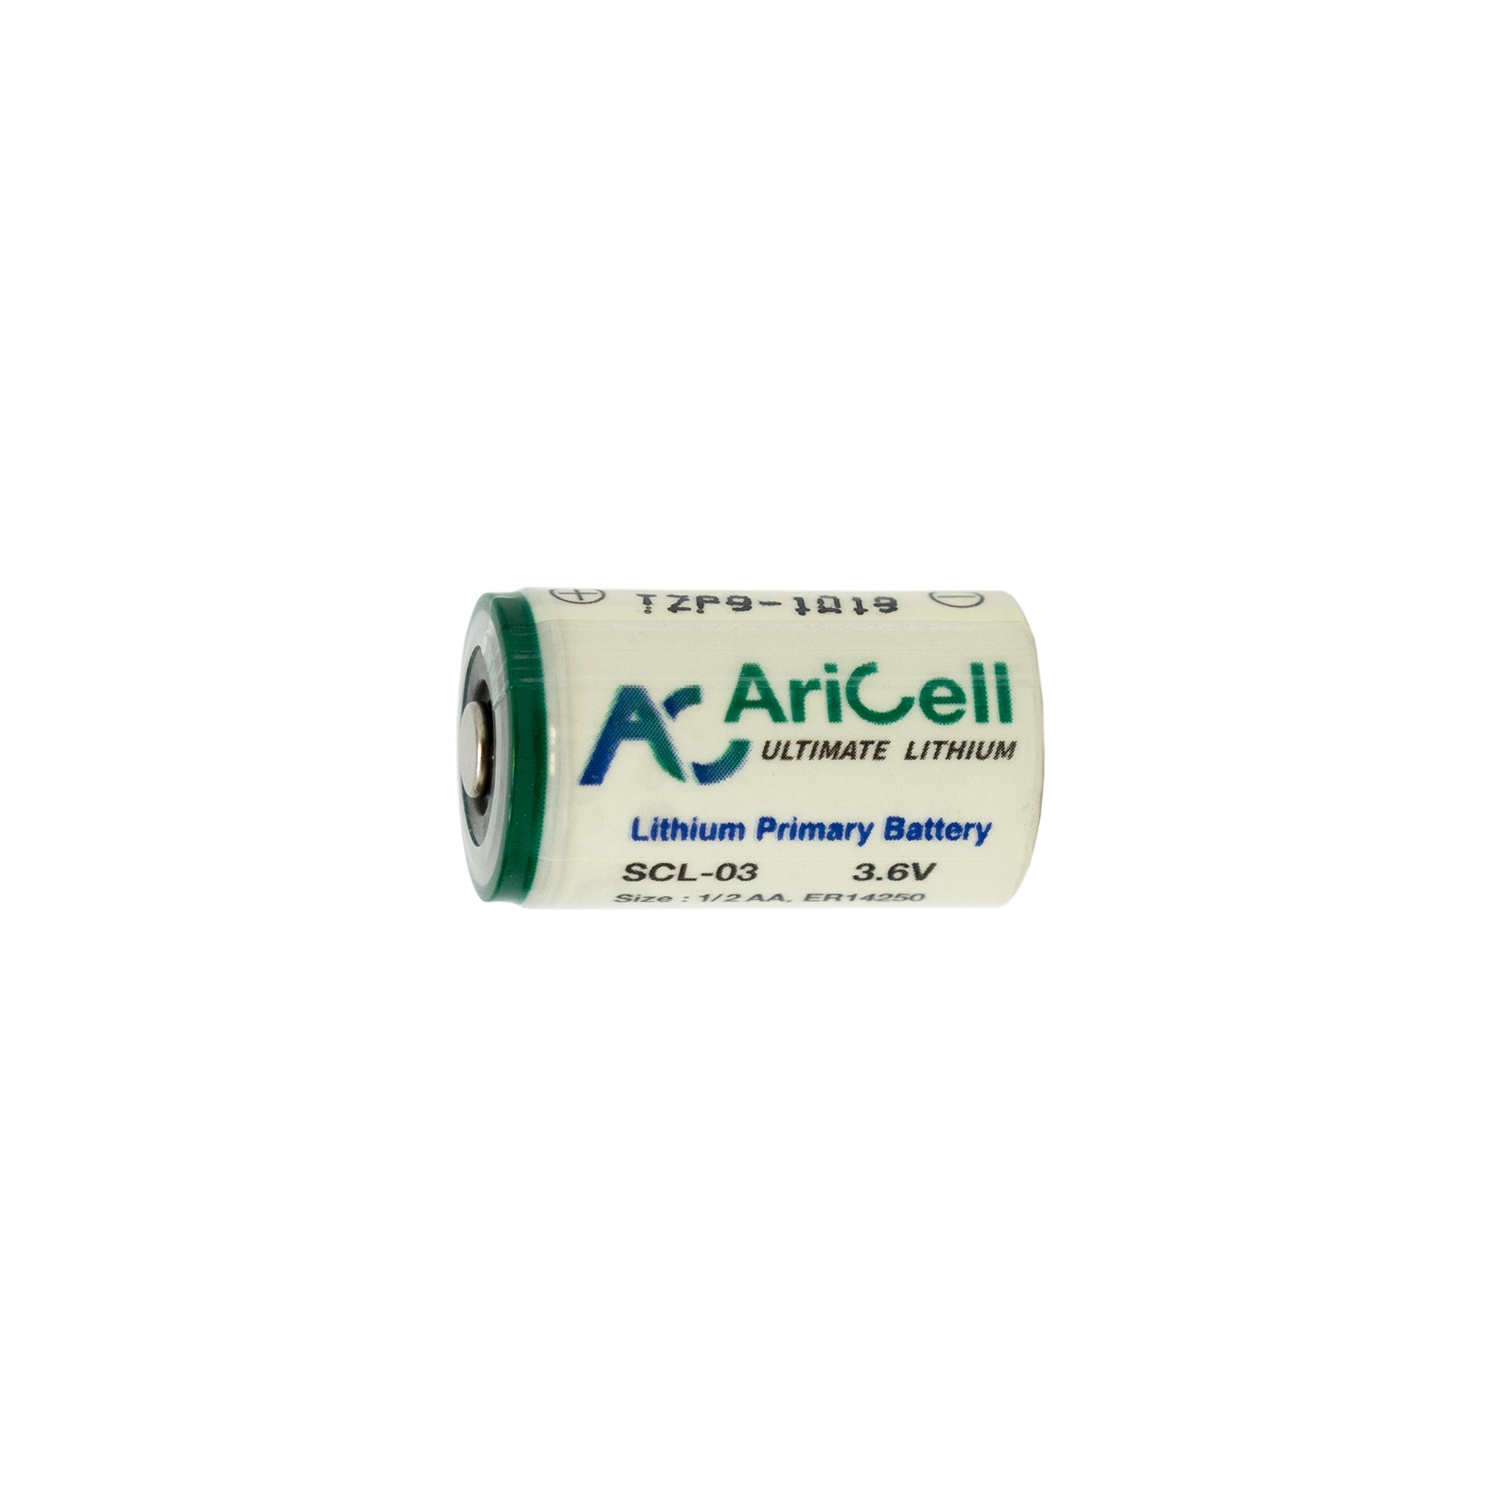 AriCell ER14250 (LS14250) 1/2 AA 3.6 Volt Primary Lithium Battery